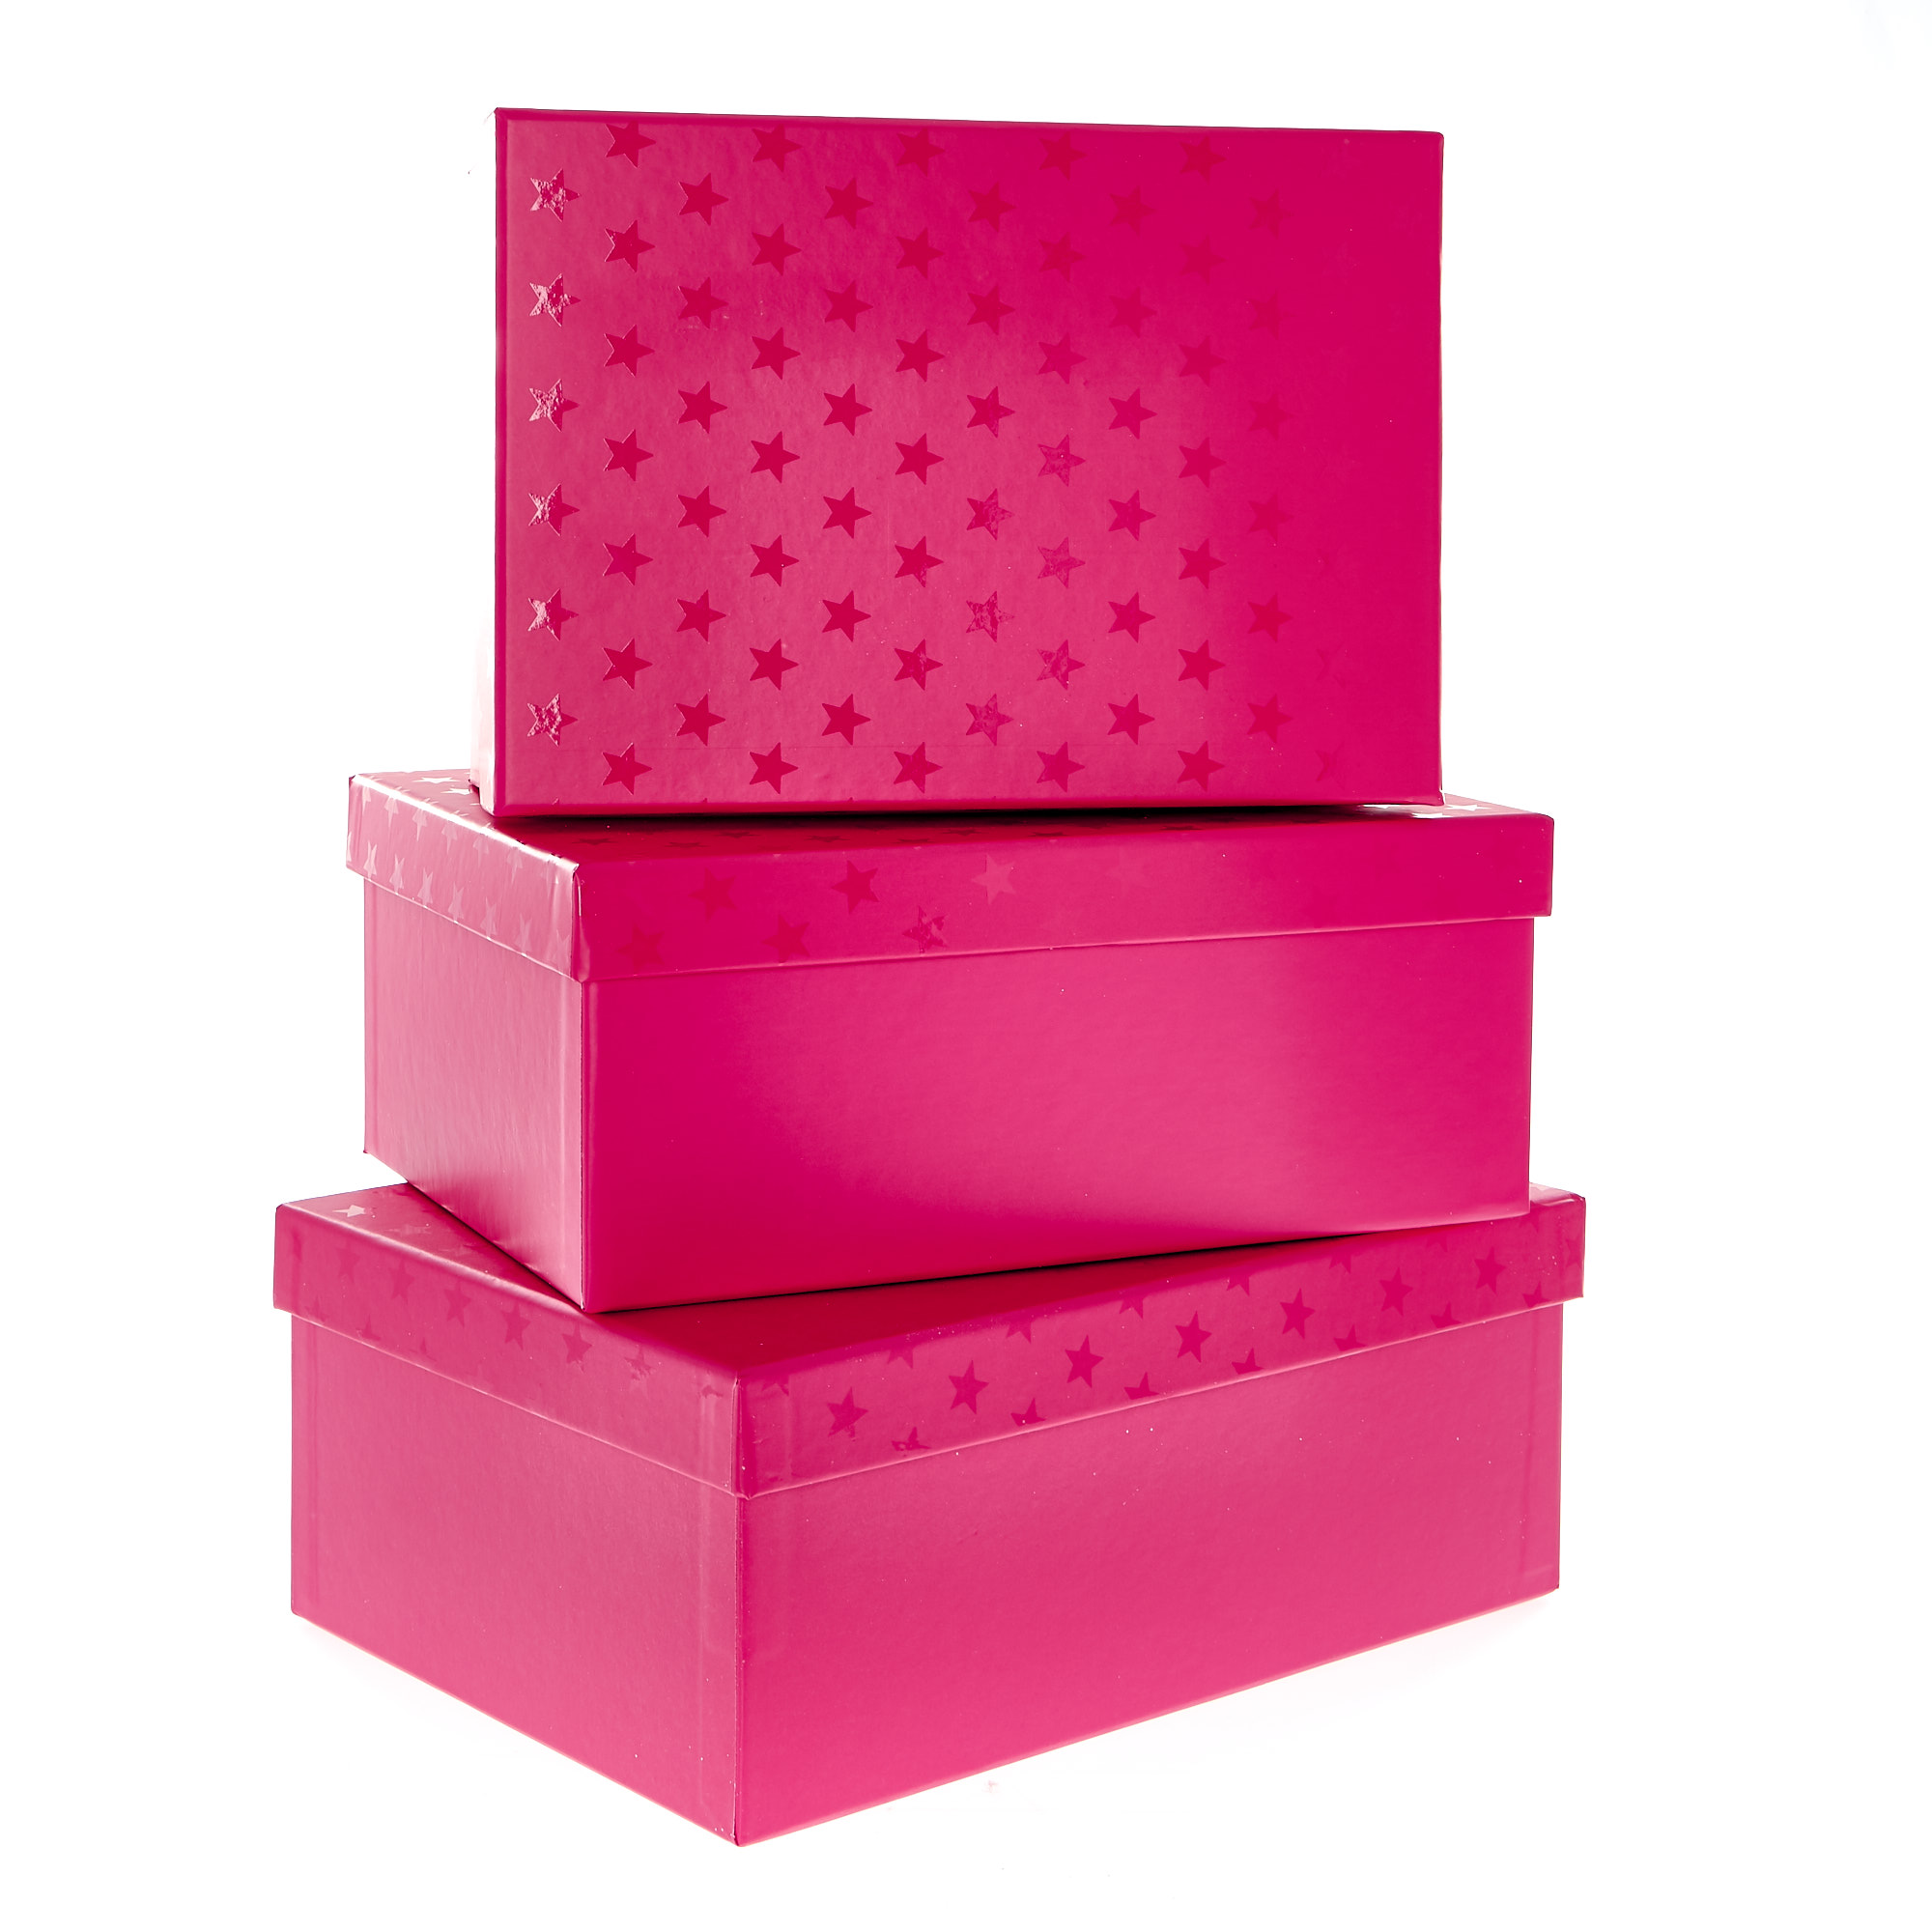 Pink Starry Gift Boxes - Set of 3